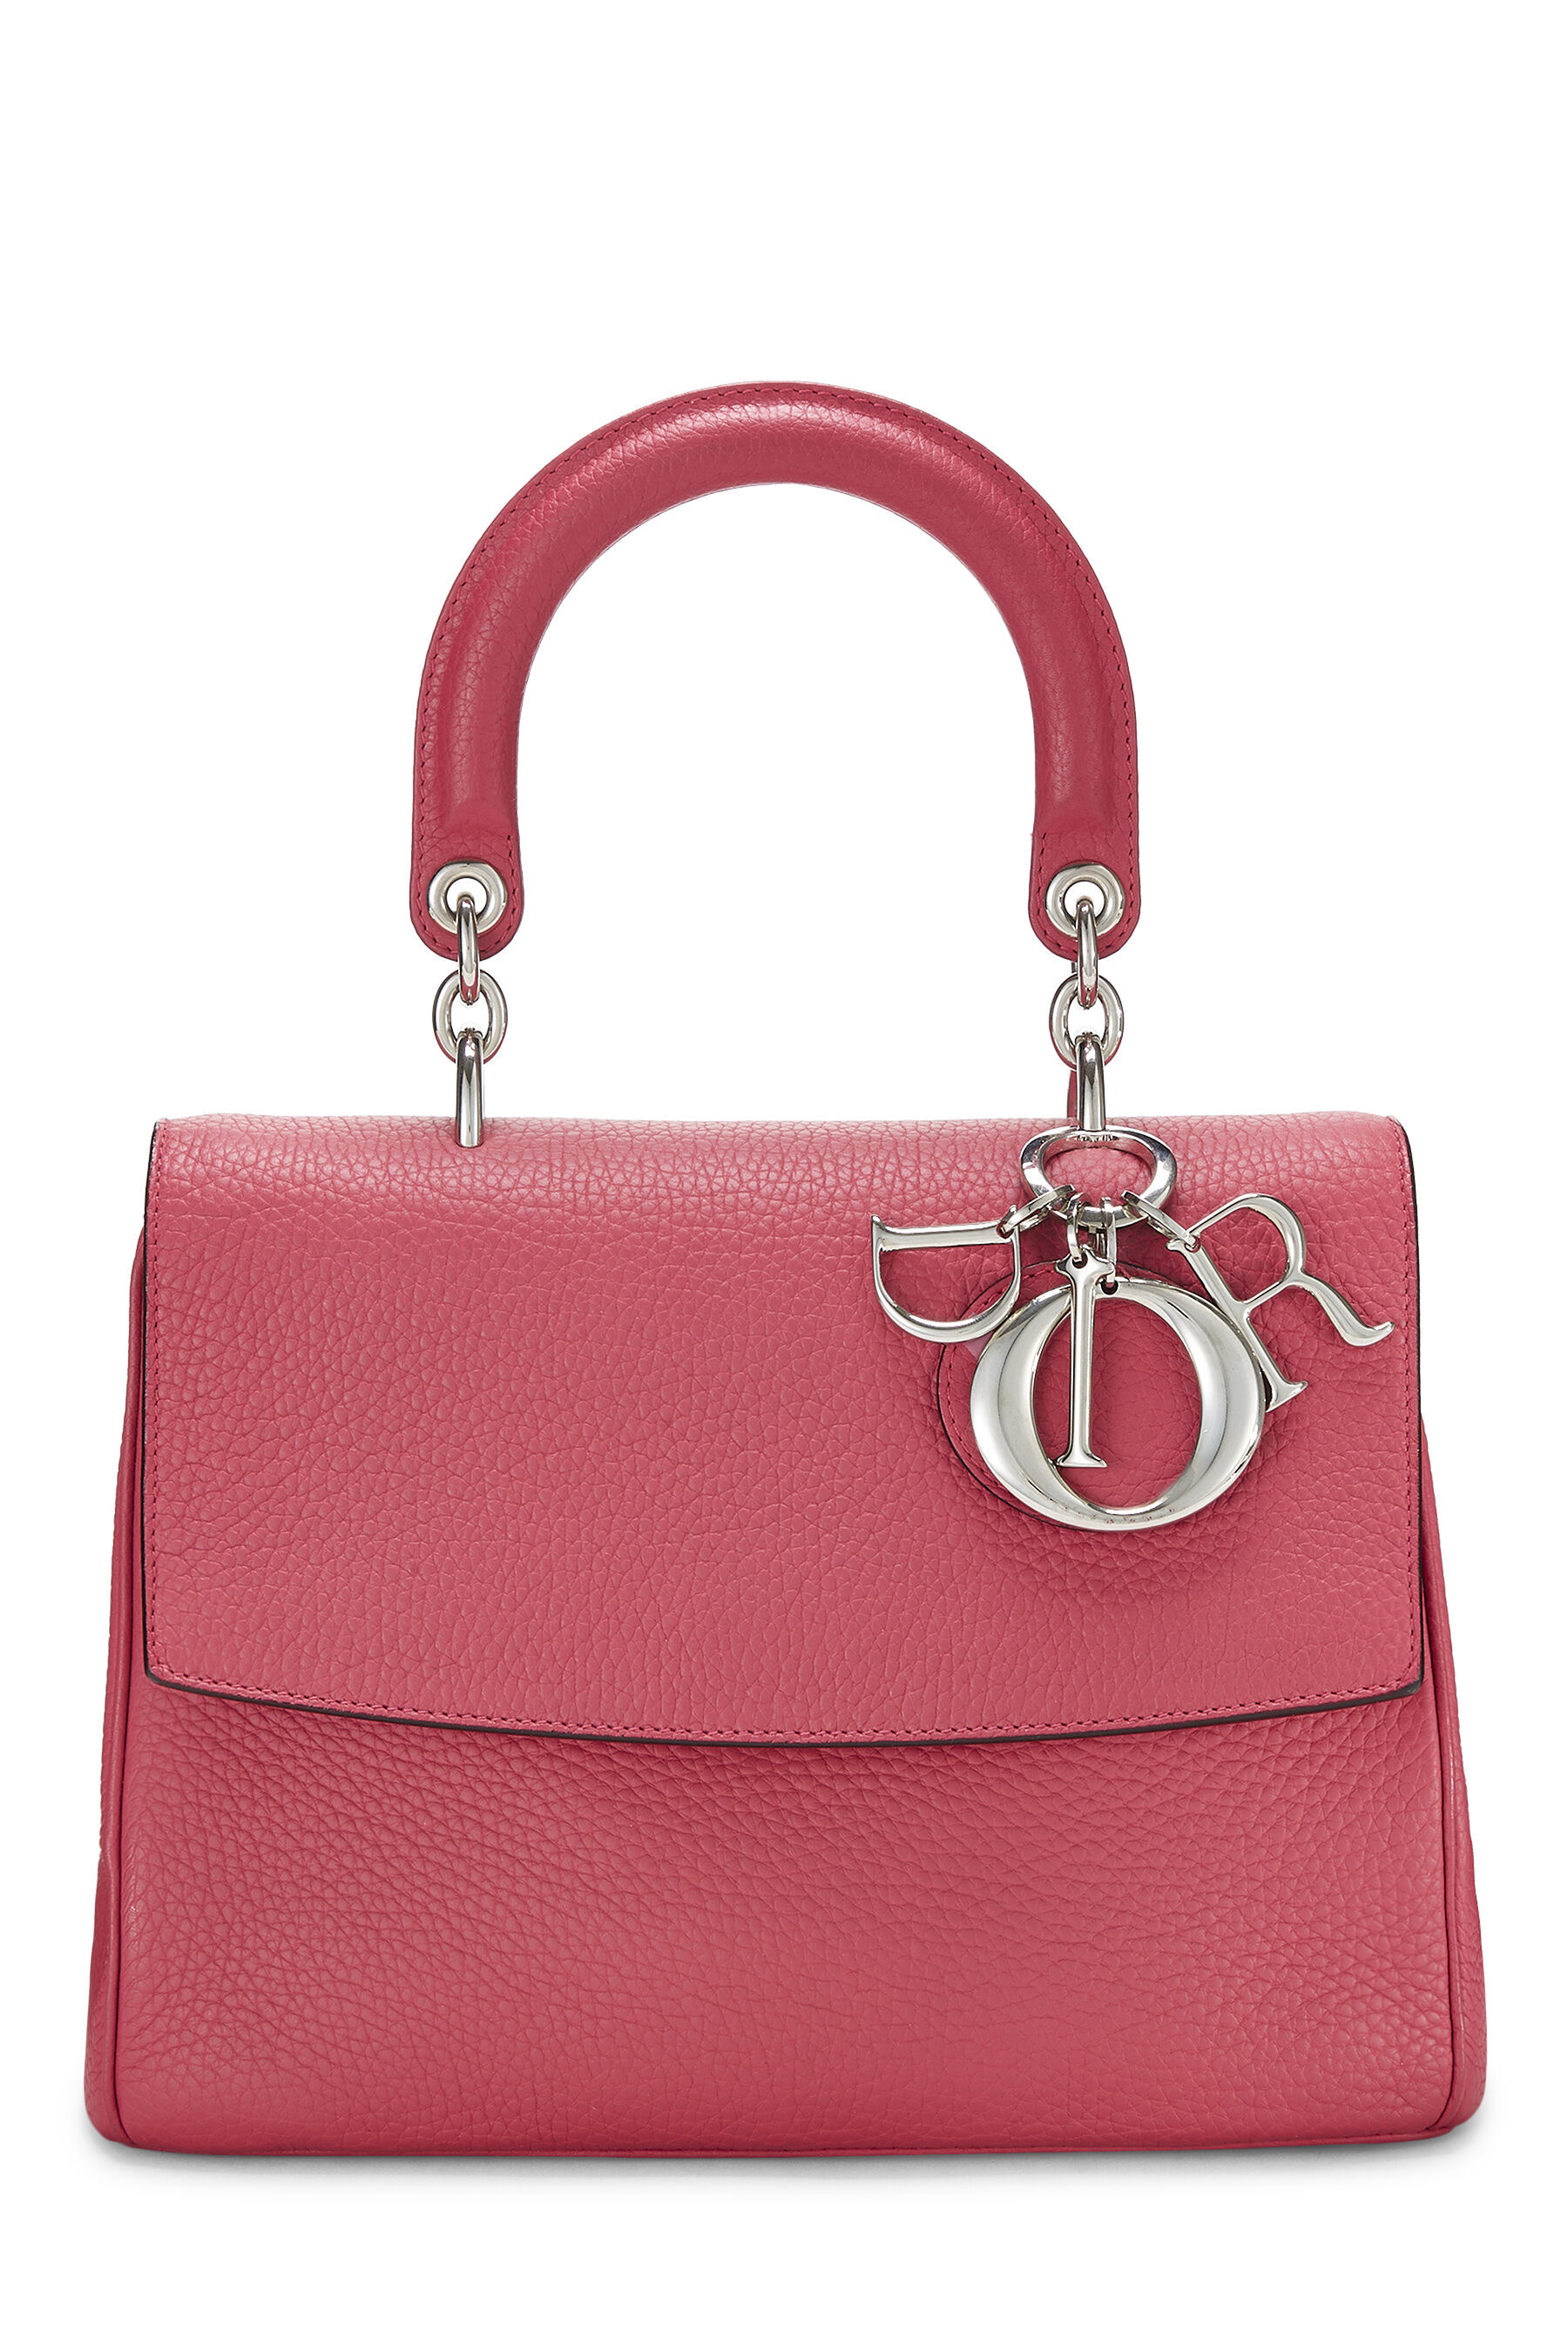 Dior Saddle Bags For Girls at Rs 2950/piece | Wallets & slingbag in Delhi |  ID: 22588819491